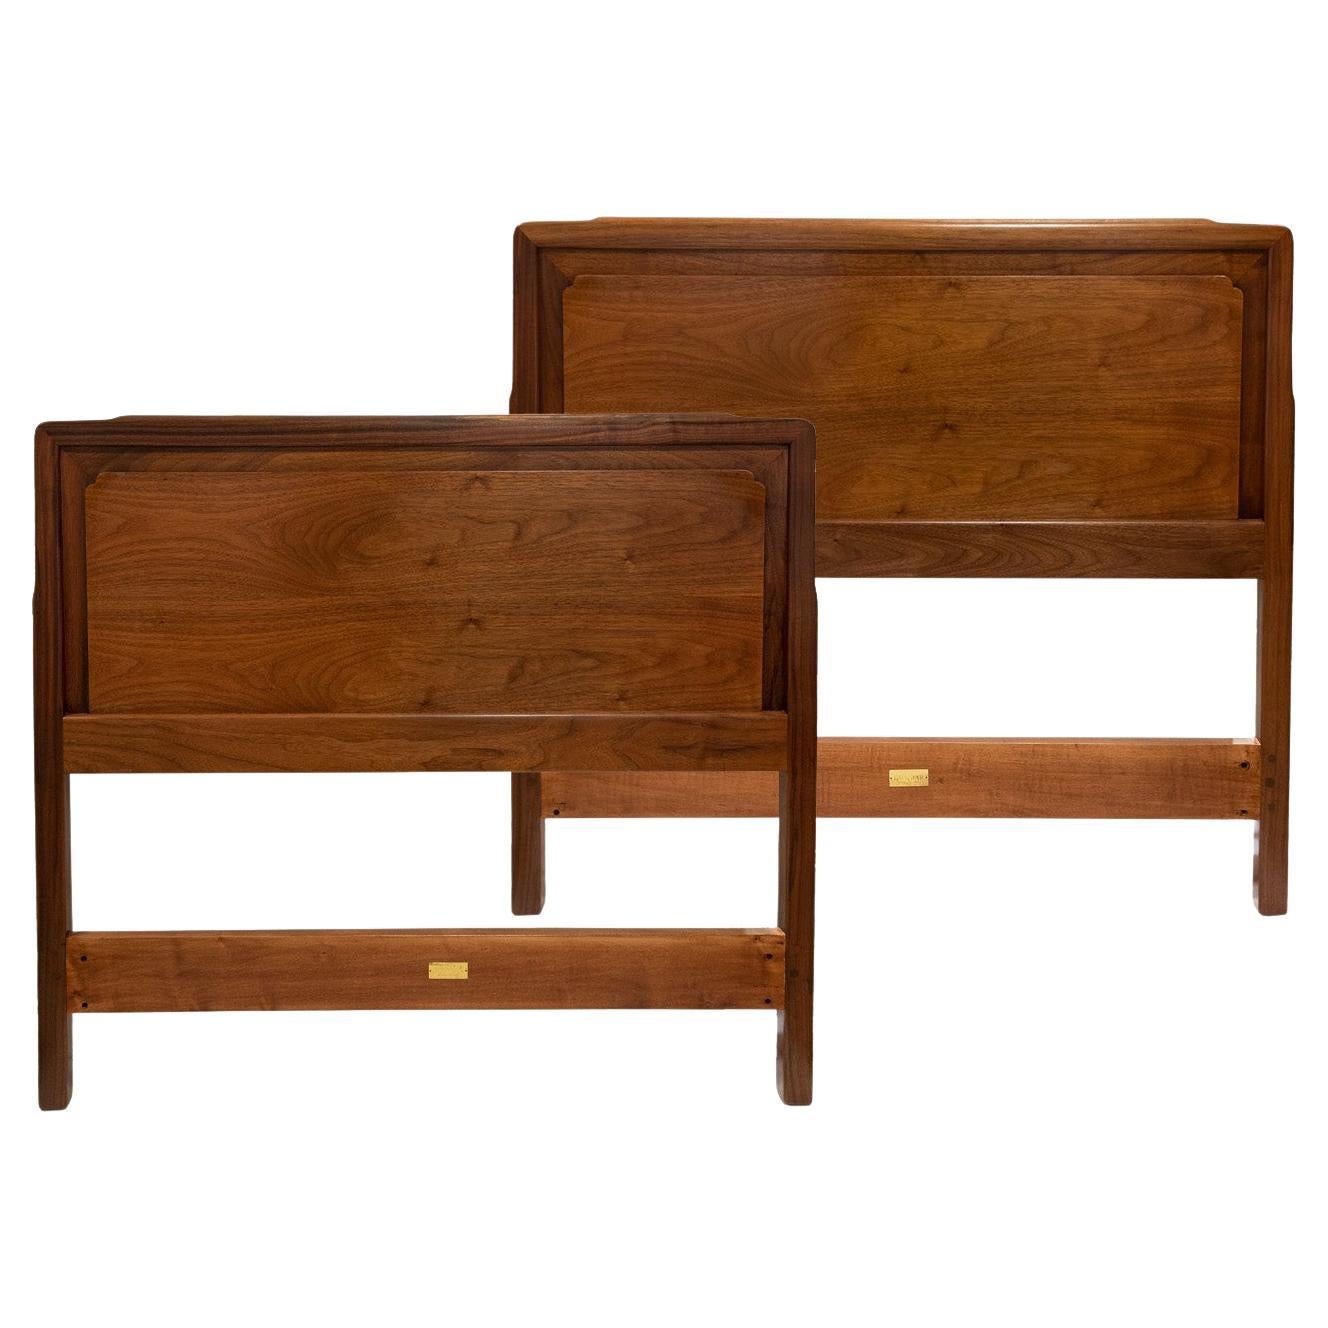 Edward Wormley Pair of Rare Twin Headboards in Sculpted Walnut 1957, 'Signed' For Sale